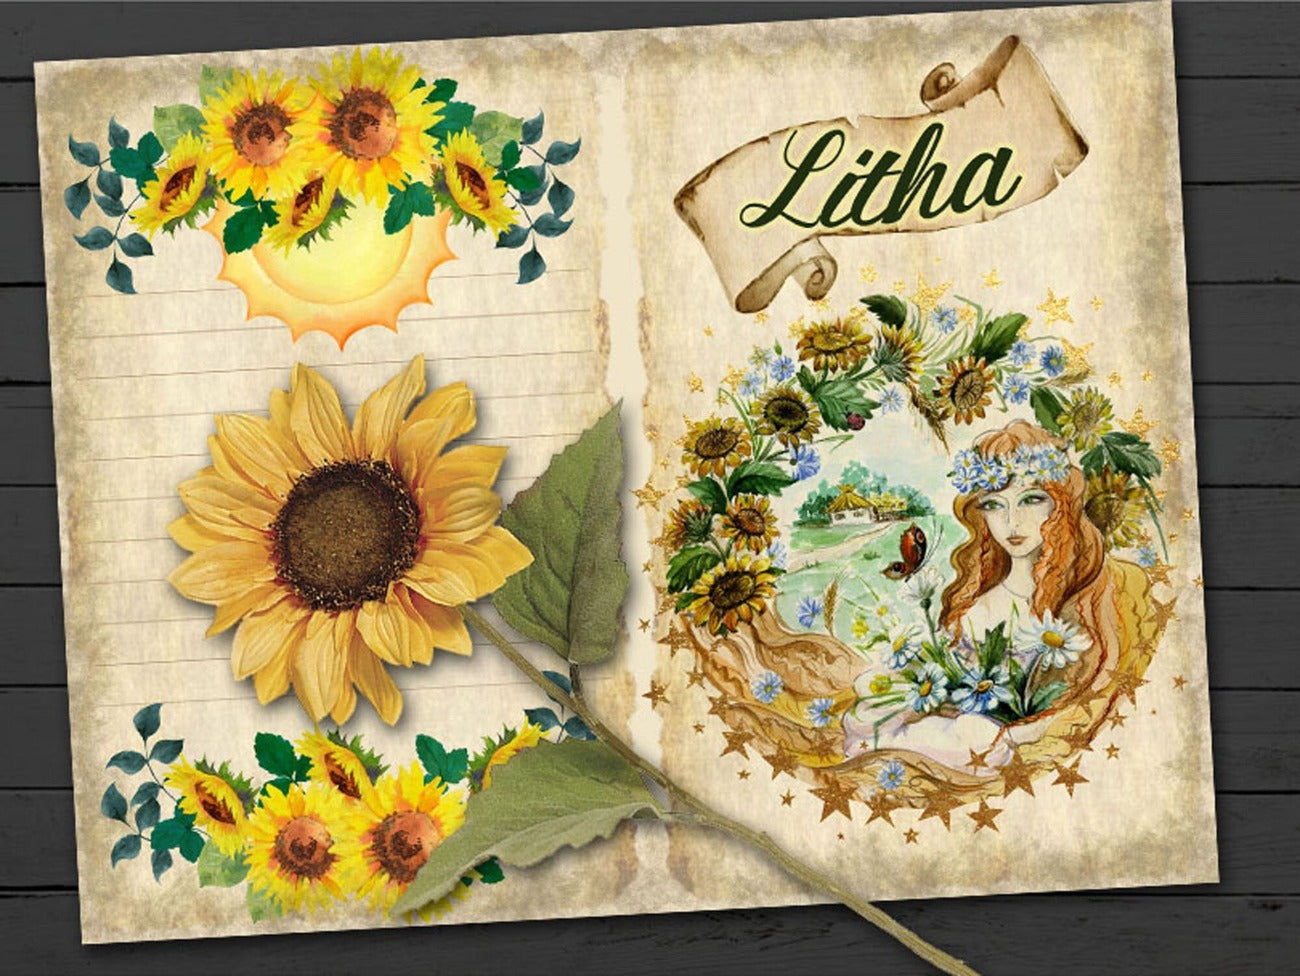 Closeup image of Litha journal front page with a stars and sunflower wreath surrounding a beautiful Litha Goddess and a vintage scroll banner that says “Litha”.